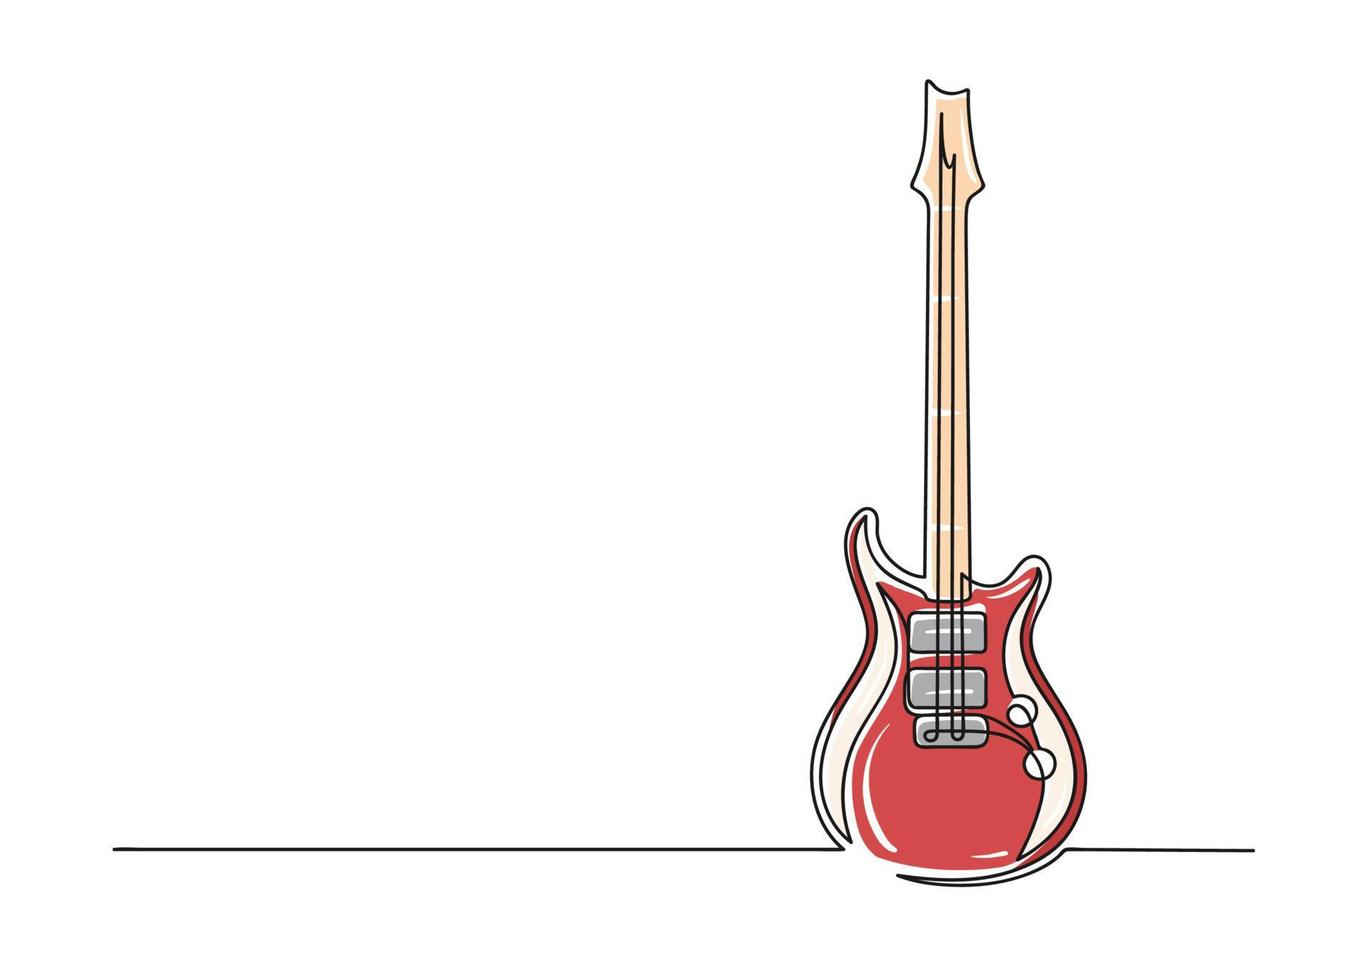 Continuous one line drawing of a guitar vector